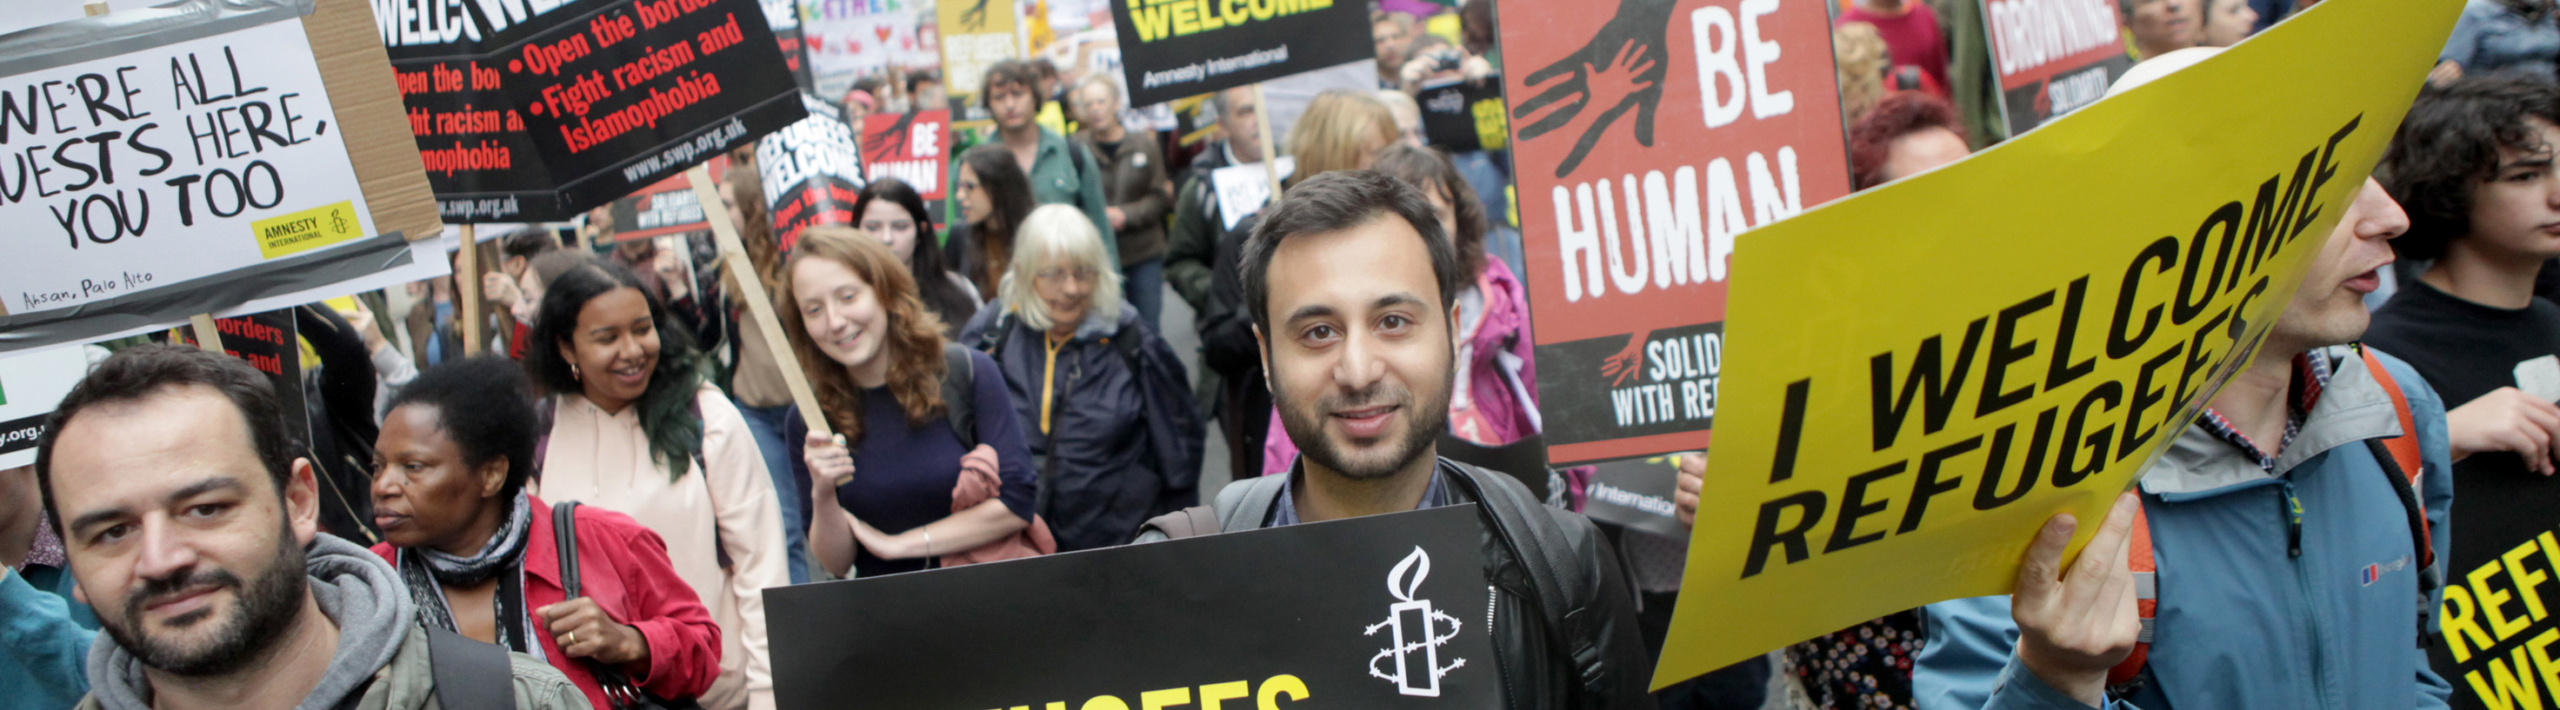 Refugees Welcome march organised by Amnesty International UK in partnership with Solidarity with Refugees and more than 40 other UK organisations. 30,000 people attended the march calling on the UK government to do more in response to the global refugee crisis ahead of the UNGA summit on refugees and migrants on September 19, 2016.